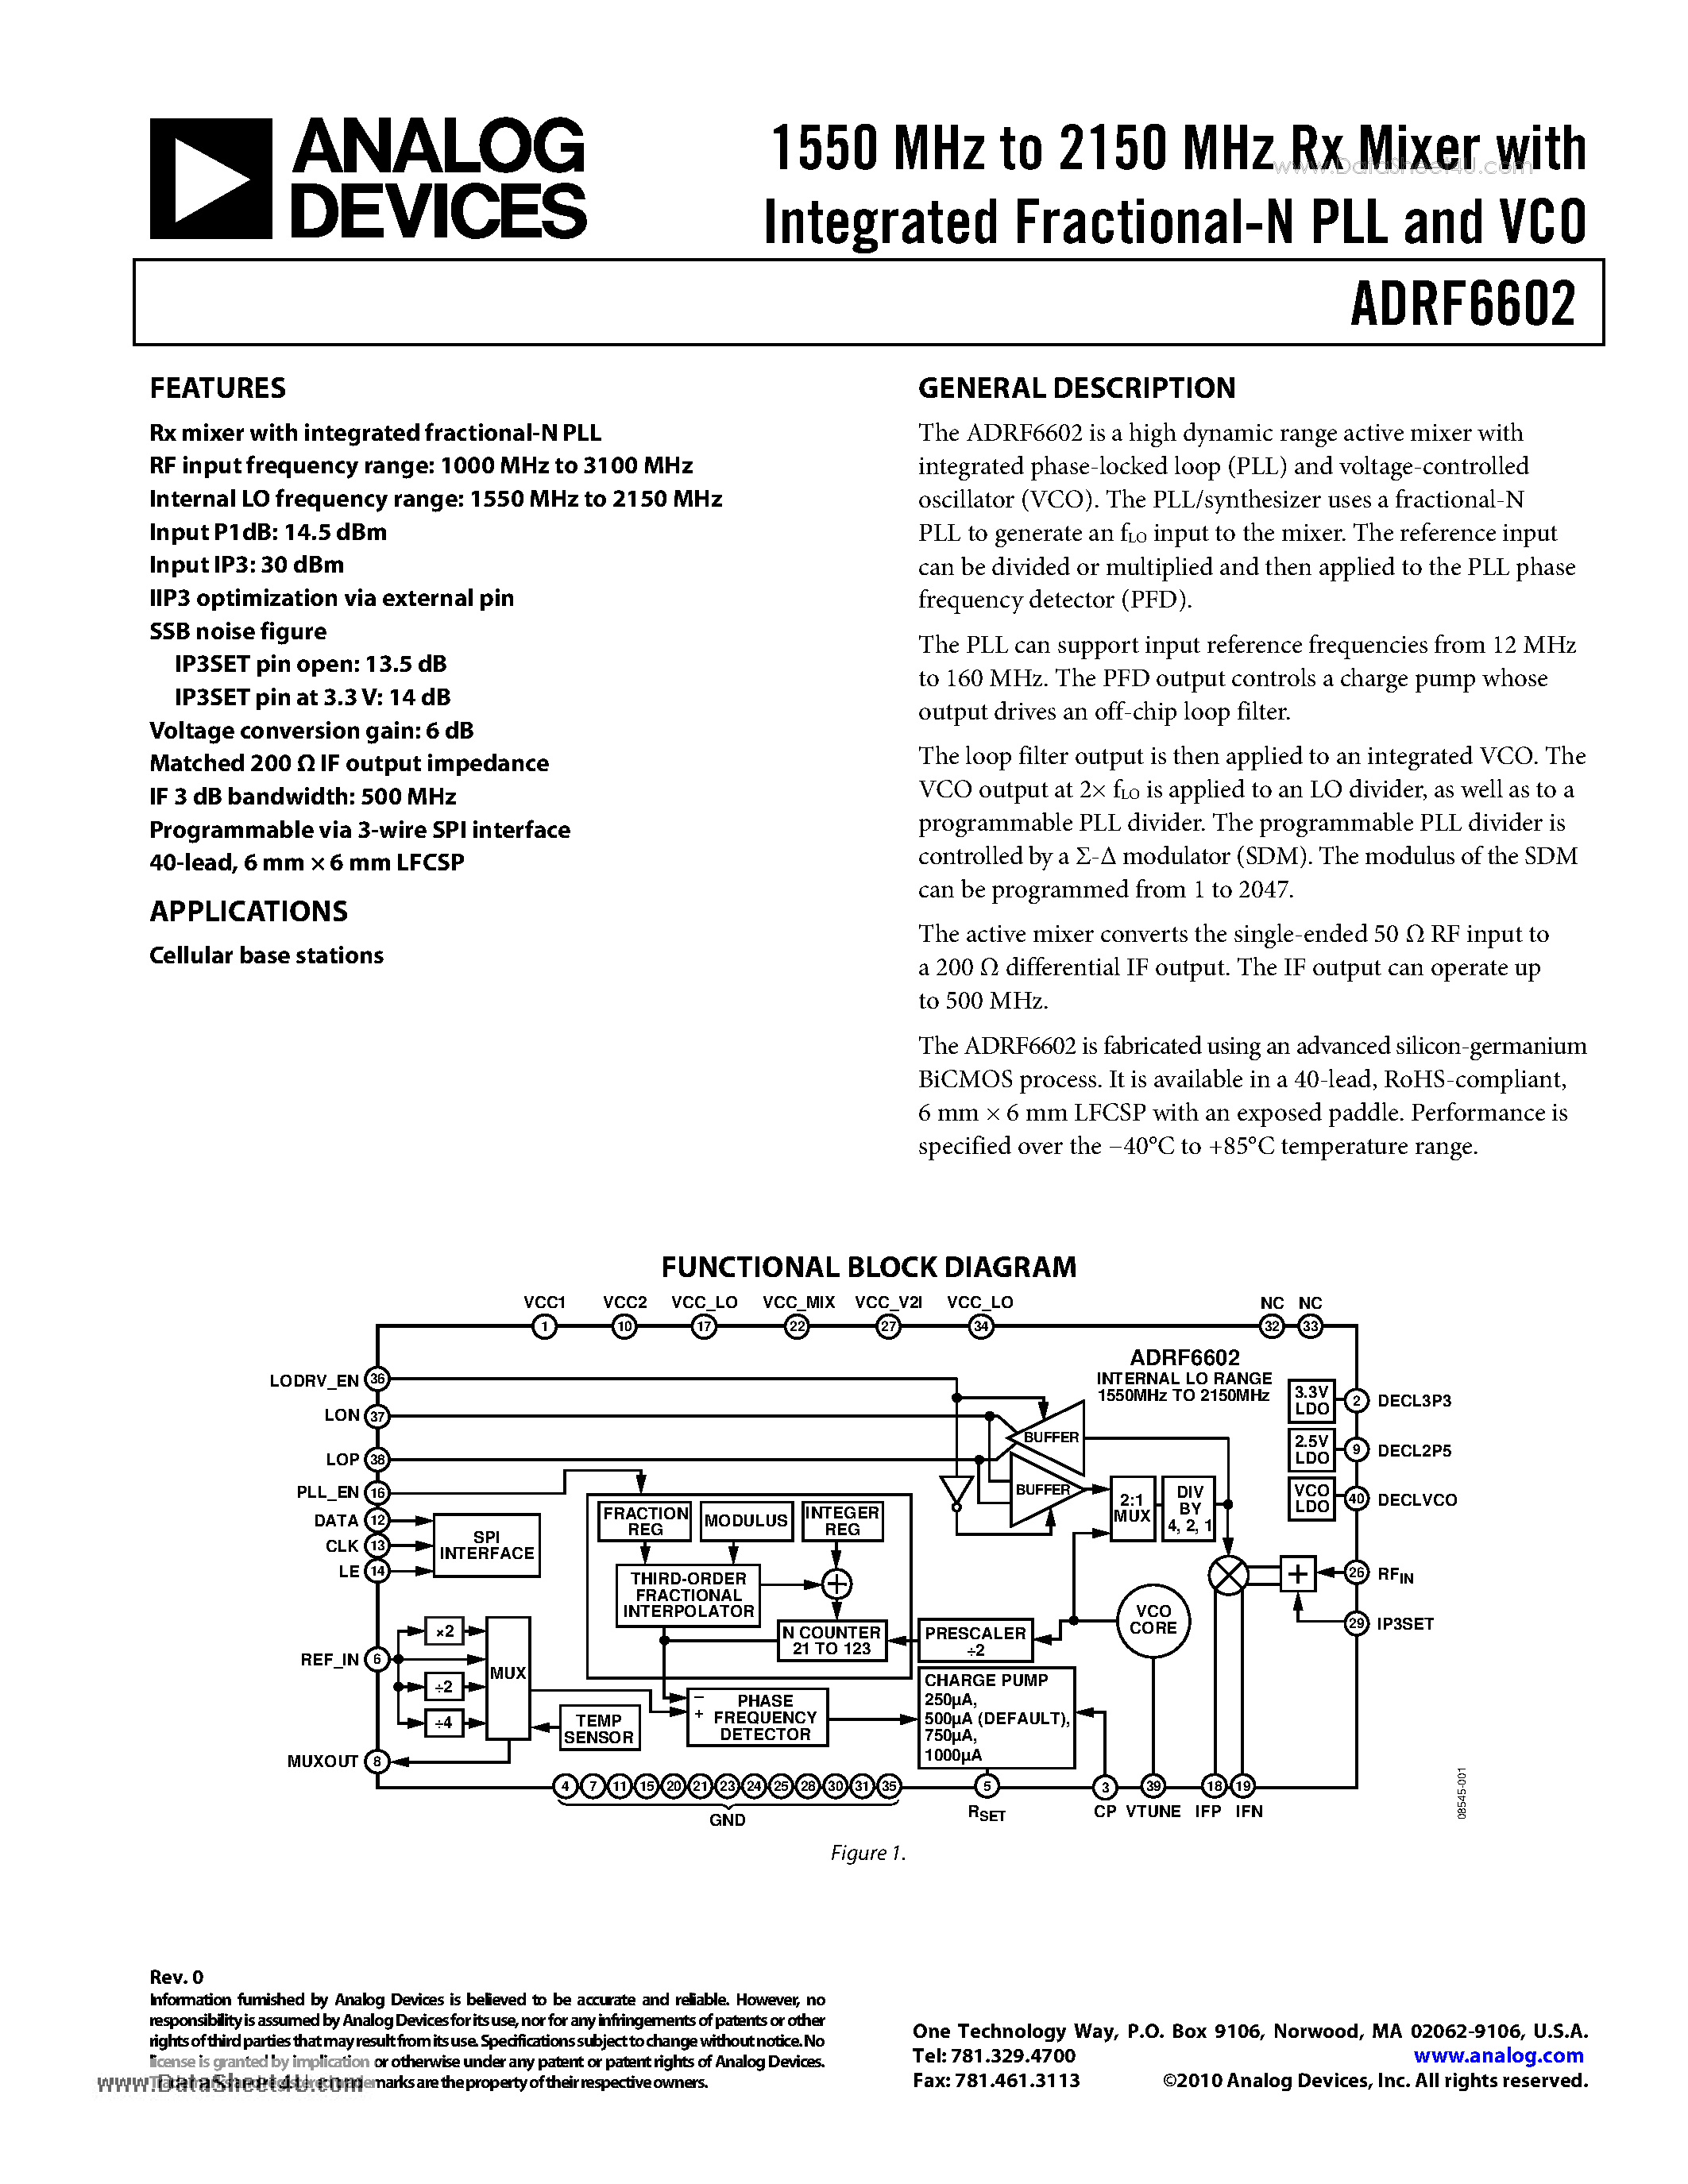 Даташит ADRF6602 - 1550 MHz to 2150 MHz Rx Mixer страница 1